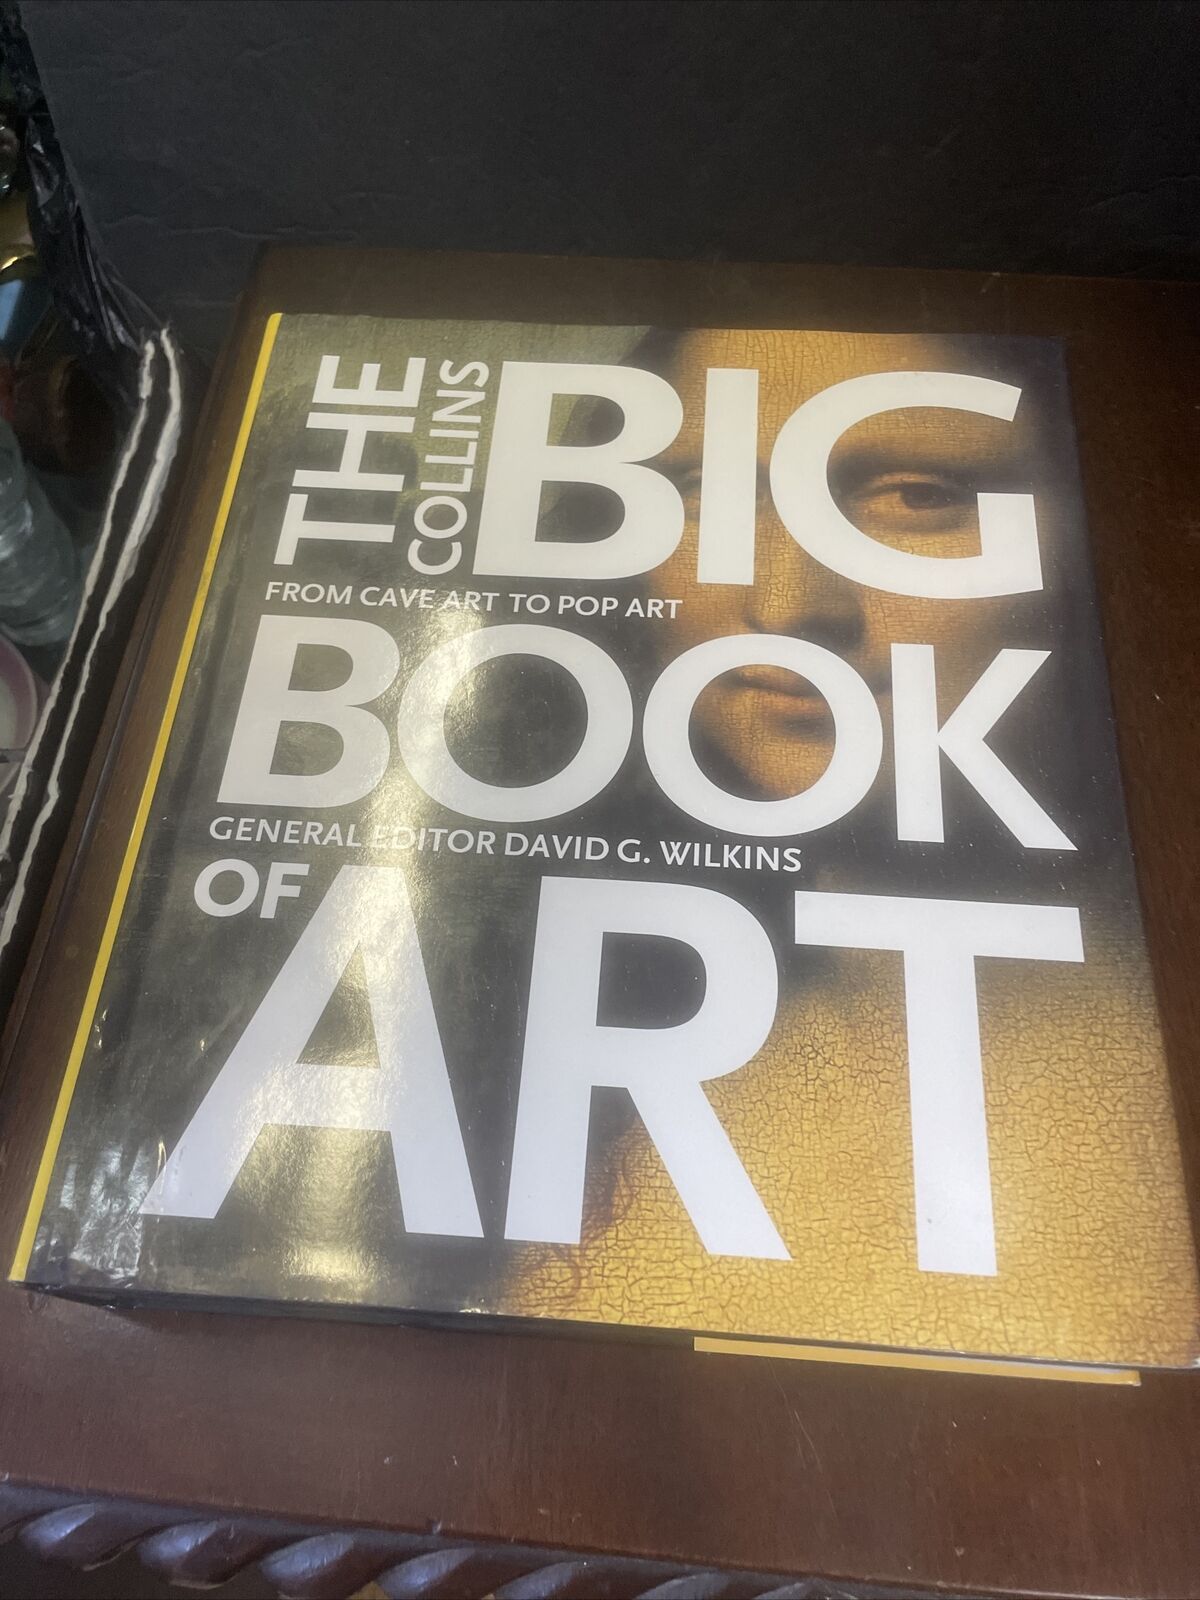 the collins big book of art from cave to pop art by david wilkins